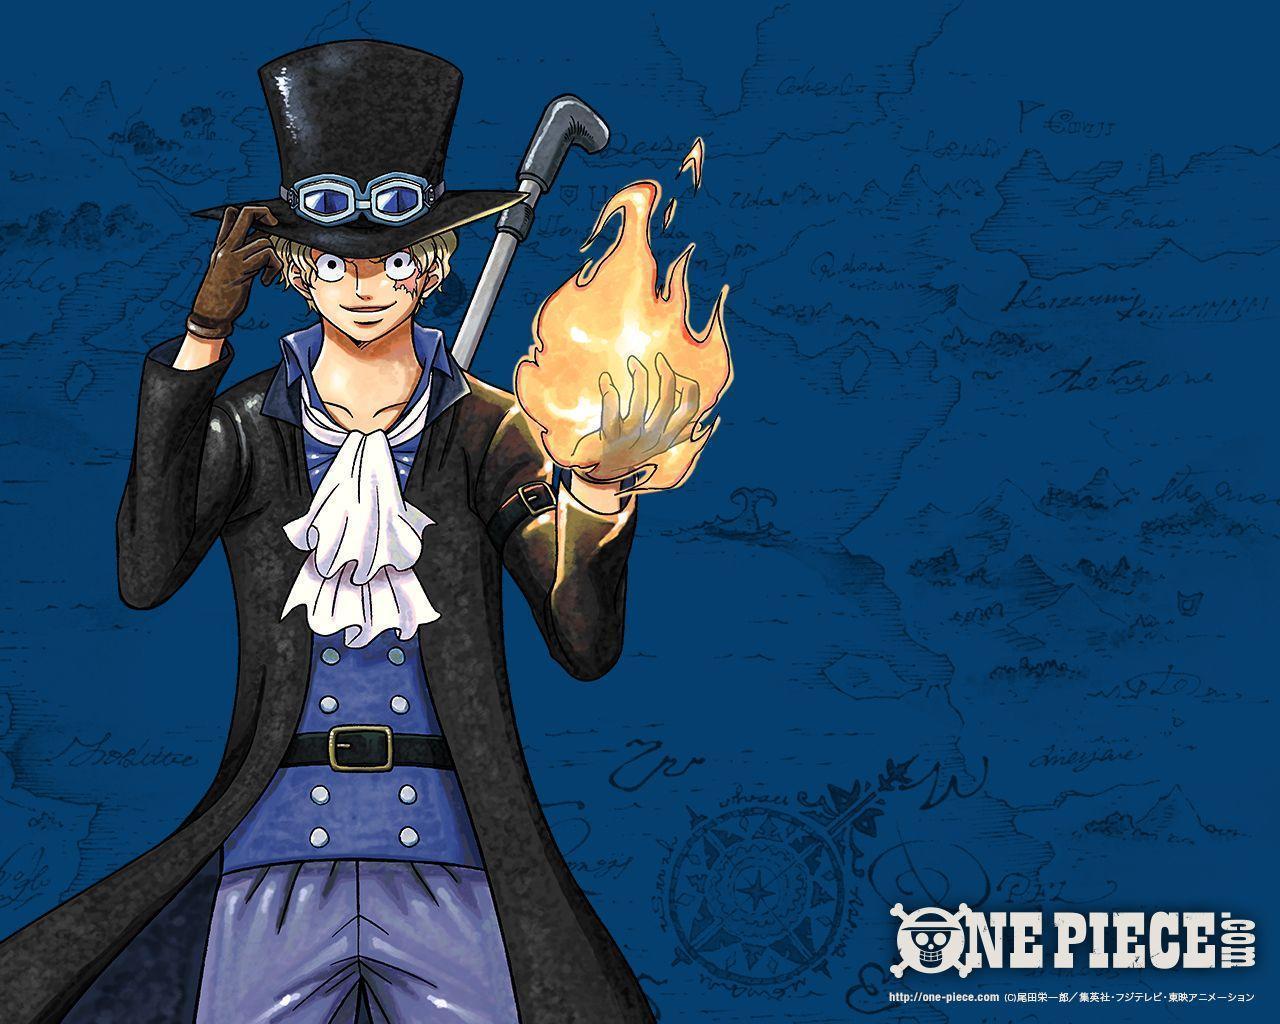 Sabo Wallpaper by me I might do Shanks or Zoro next  rOnePiece